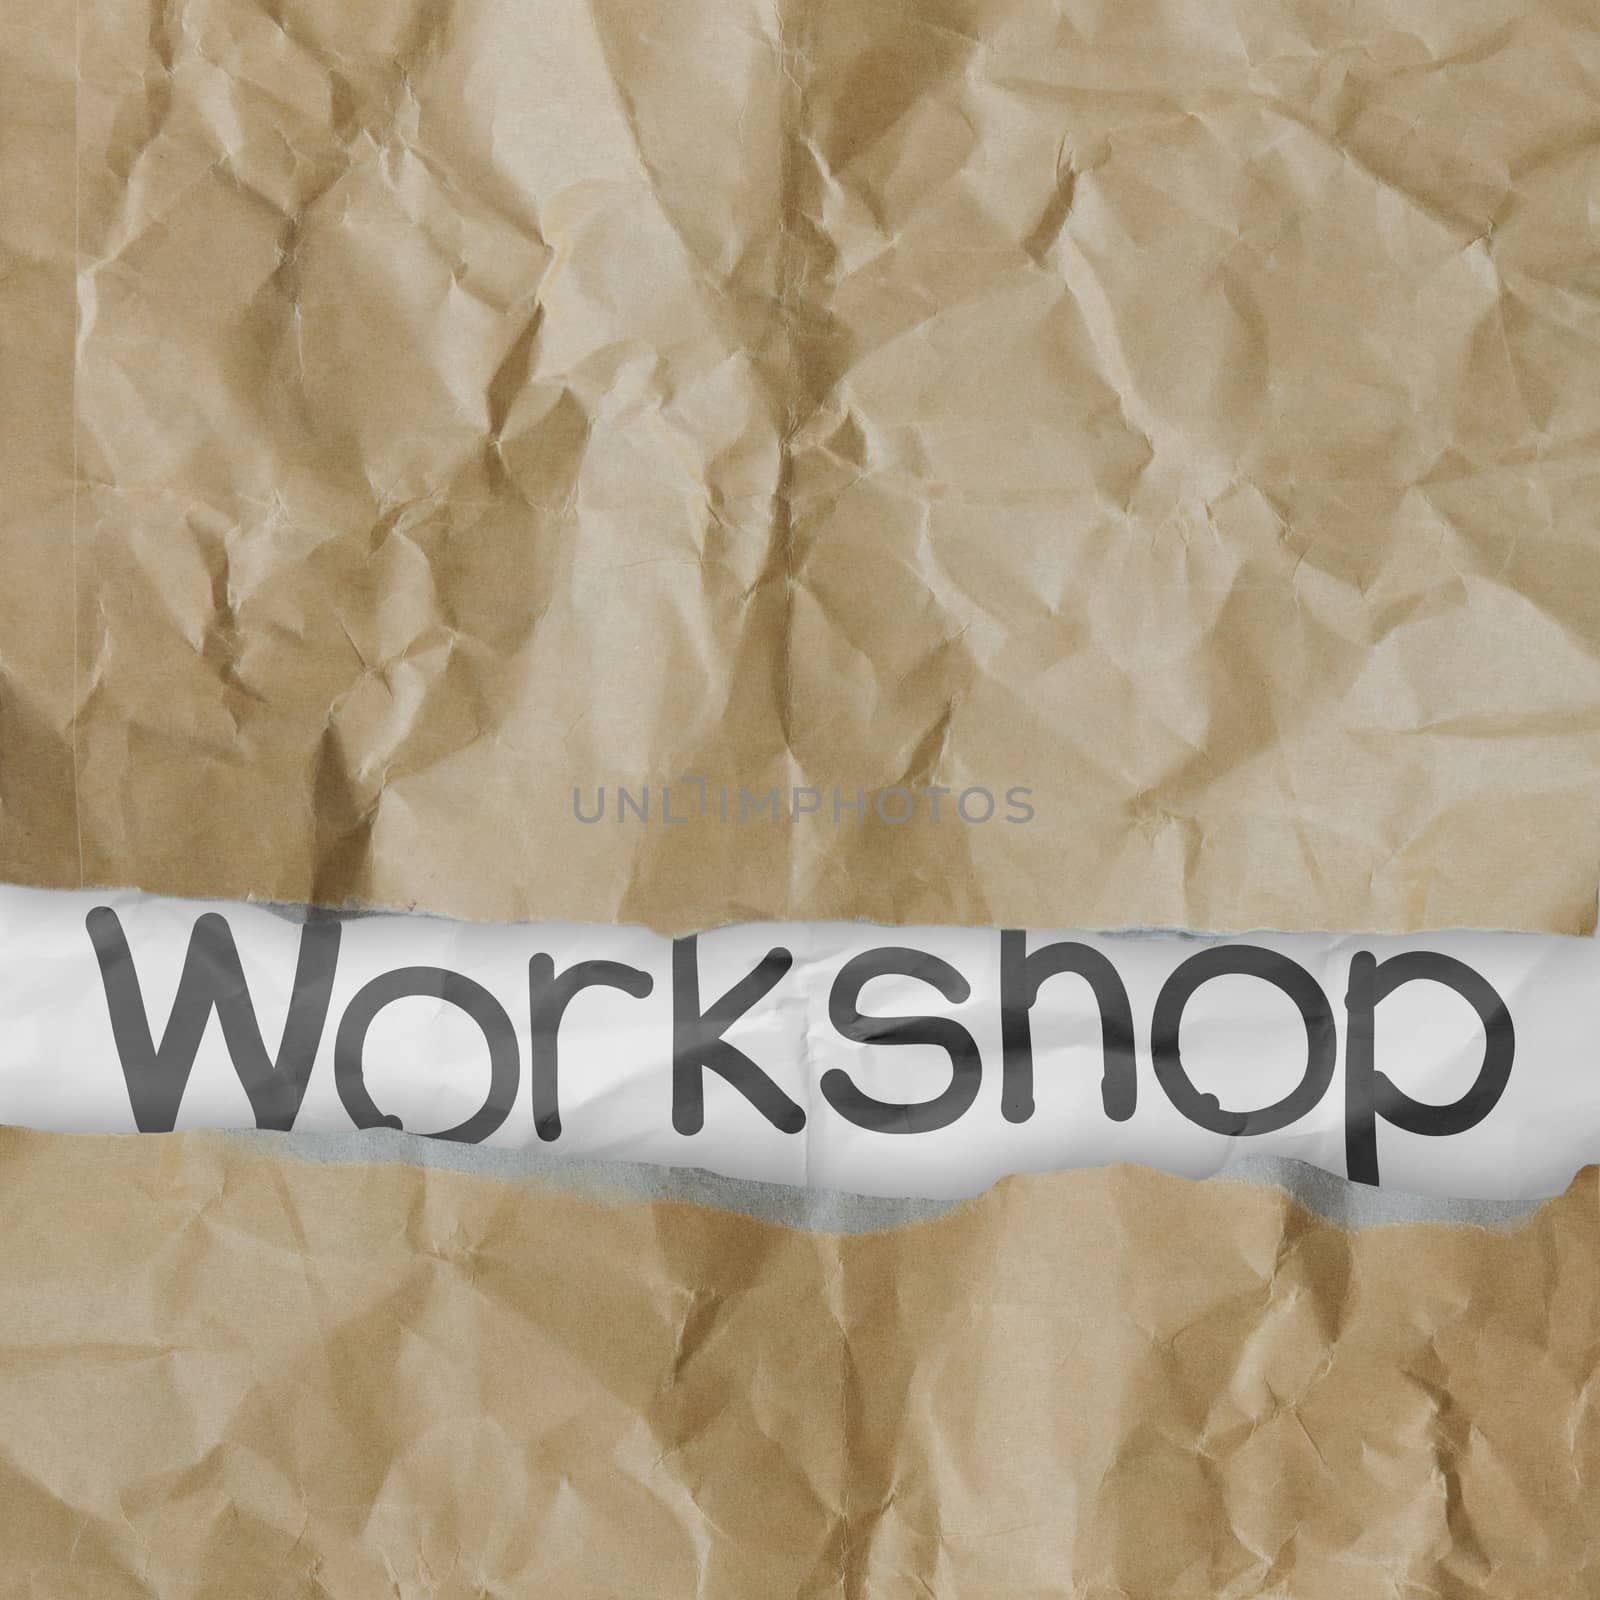 hand drawn workshop words on crumpled paper with tear envelope as concept